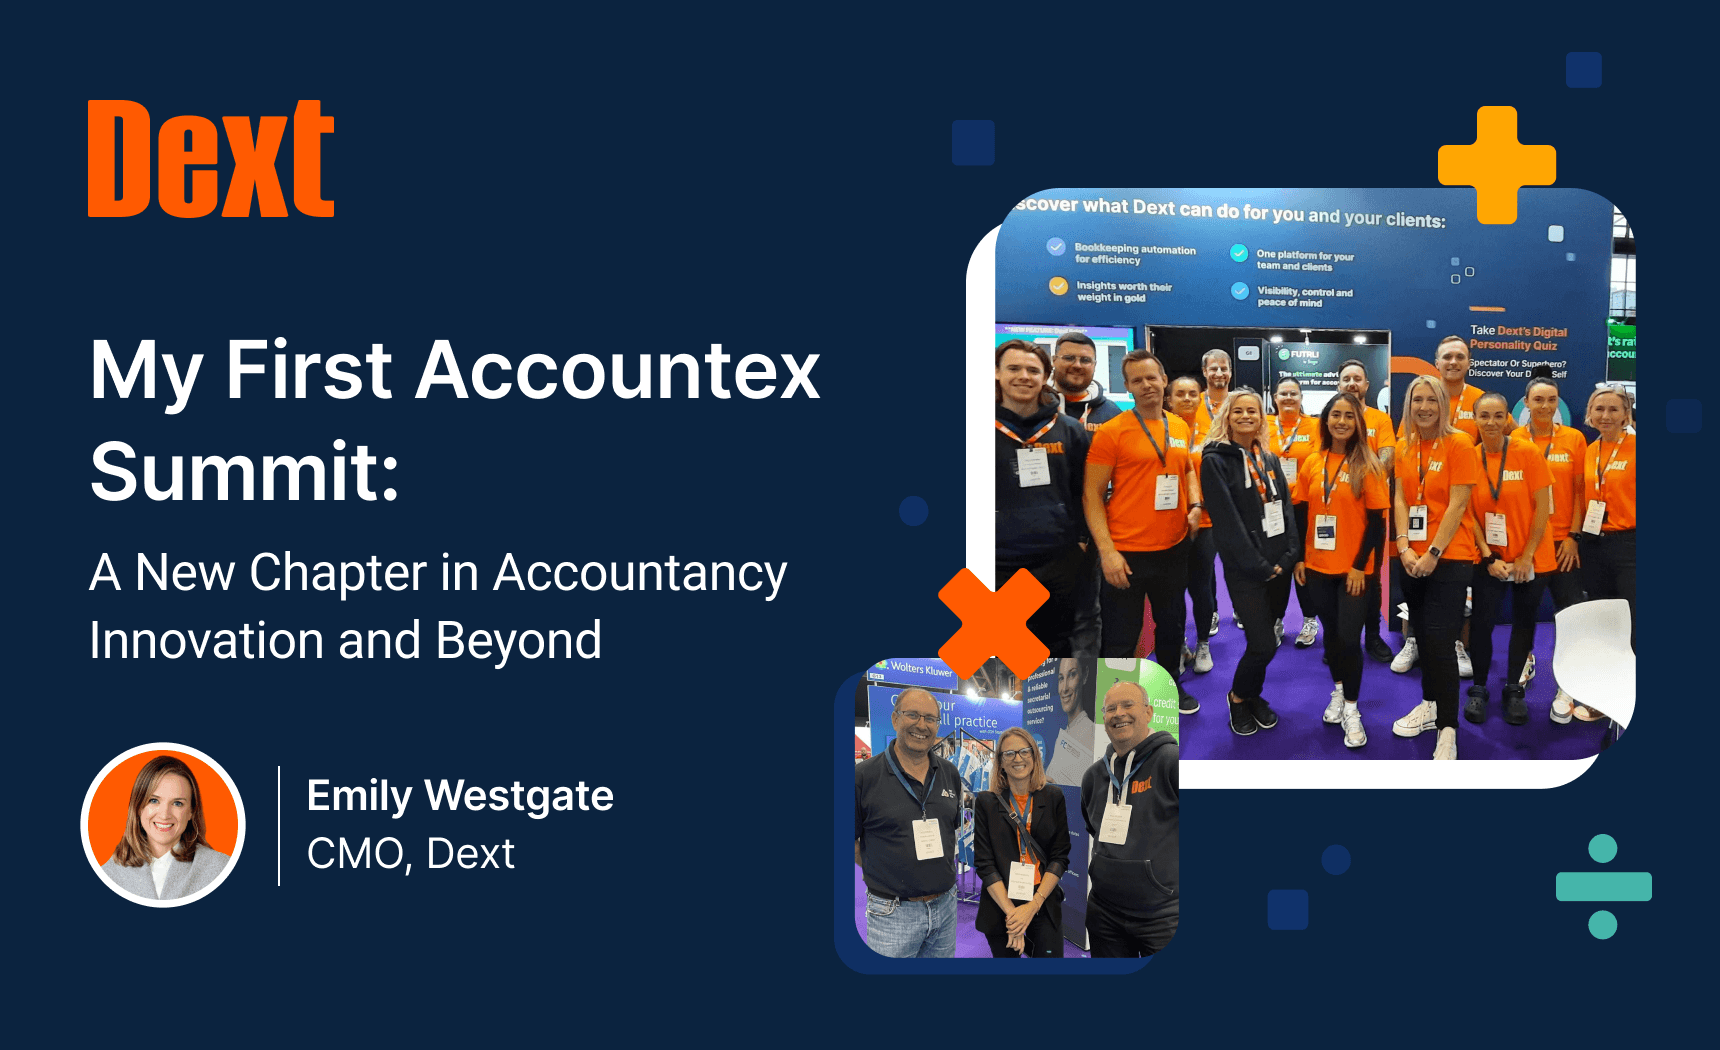 My First Accountex Summit: A New Chapter in Accountancy Innovation and Beyond